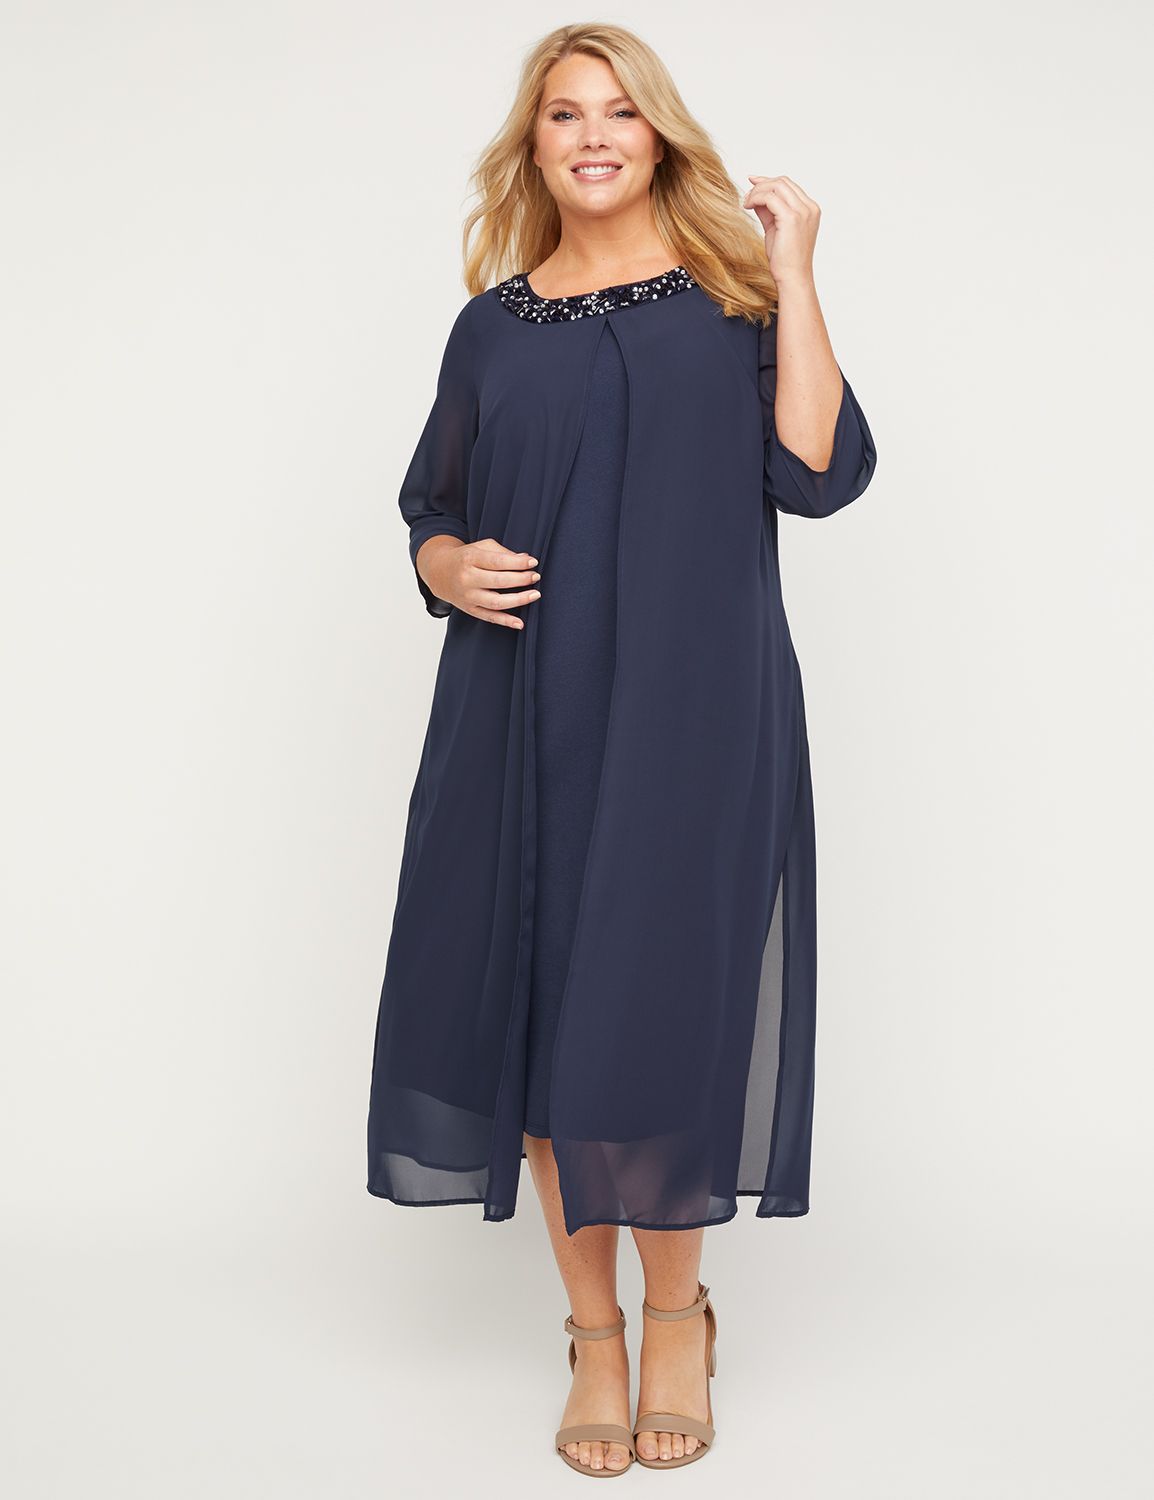 Plus Size Formal \u0026 Special Occasion 